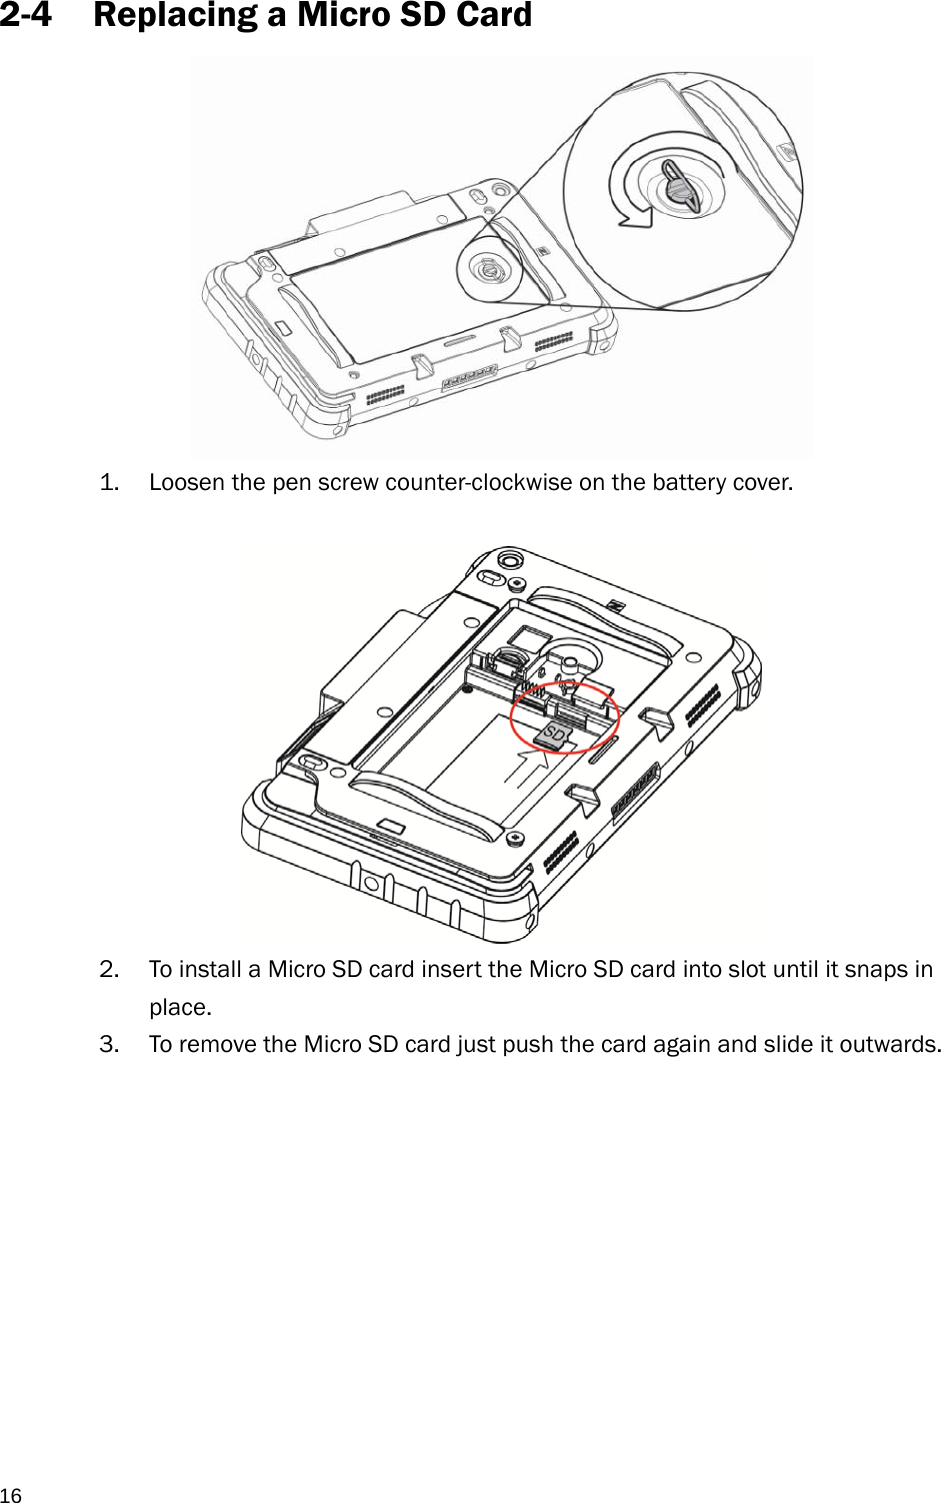  16 2-4 Replacing a Micro SD Card            1. Loosen the pen screw counter-clockwise on the battery cover.   2. To install a Micro SD card insert the Micro SD card into slot until it snaps in place. 3. To remove the Micro SD card just push the card again and slide it outwards.           